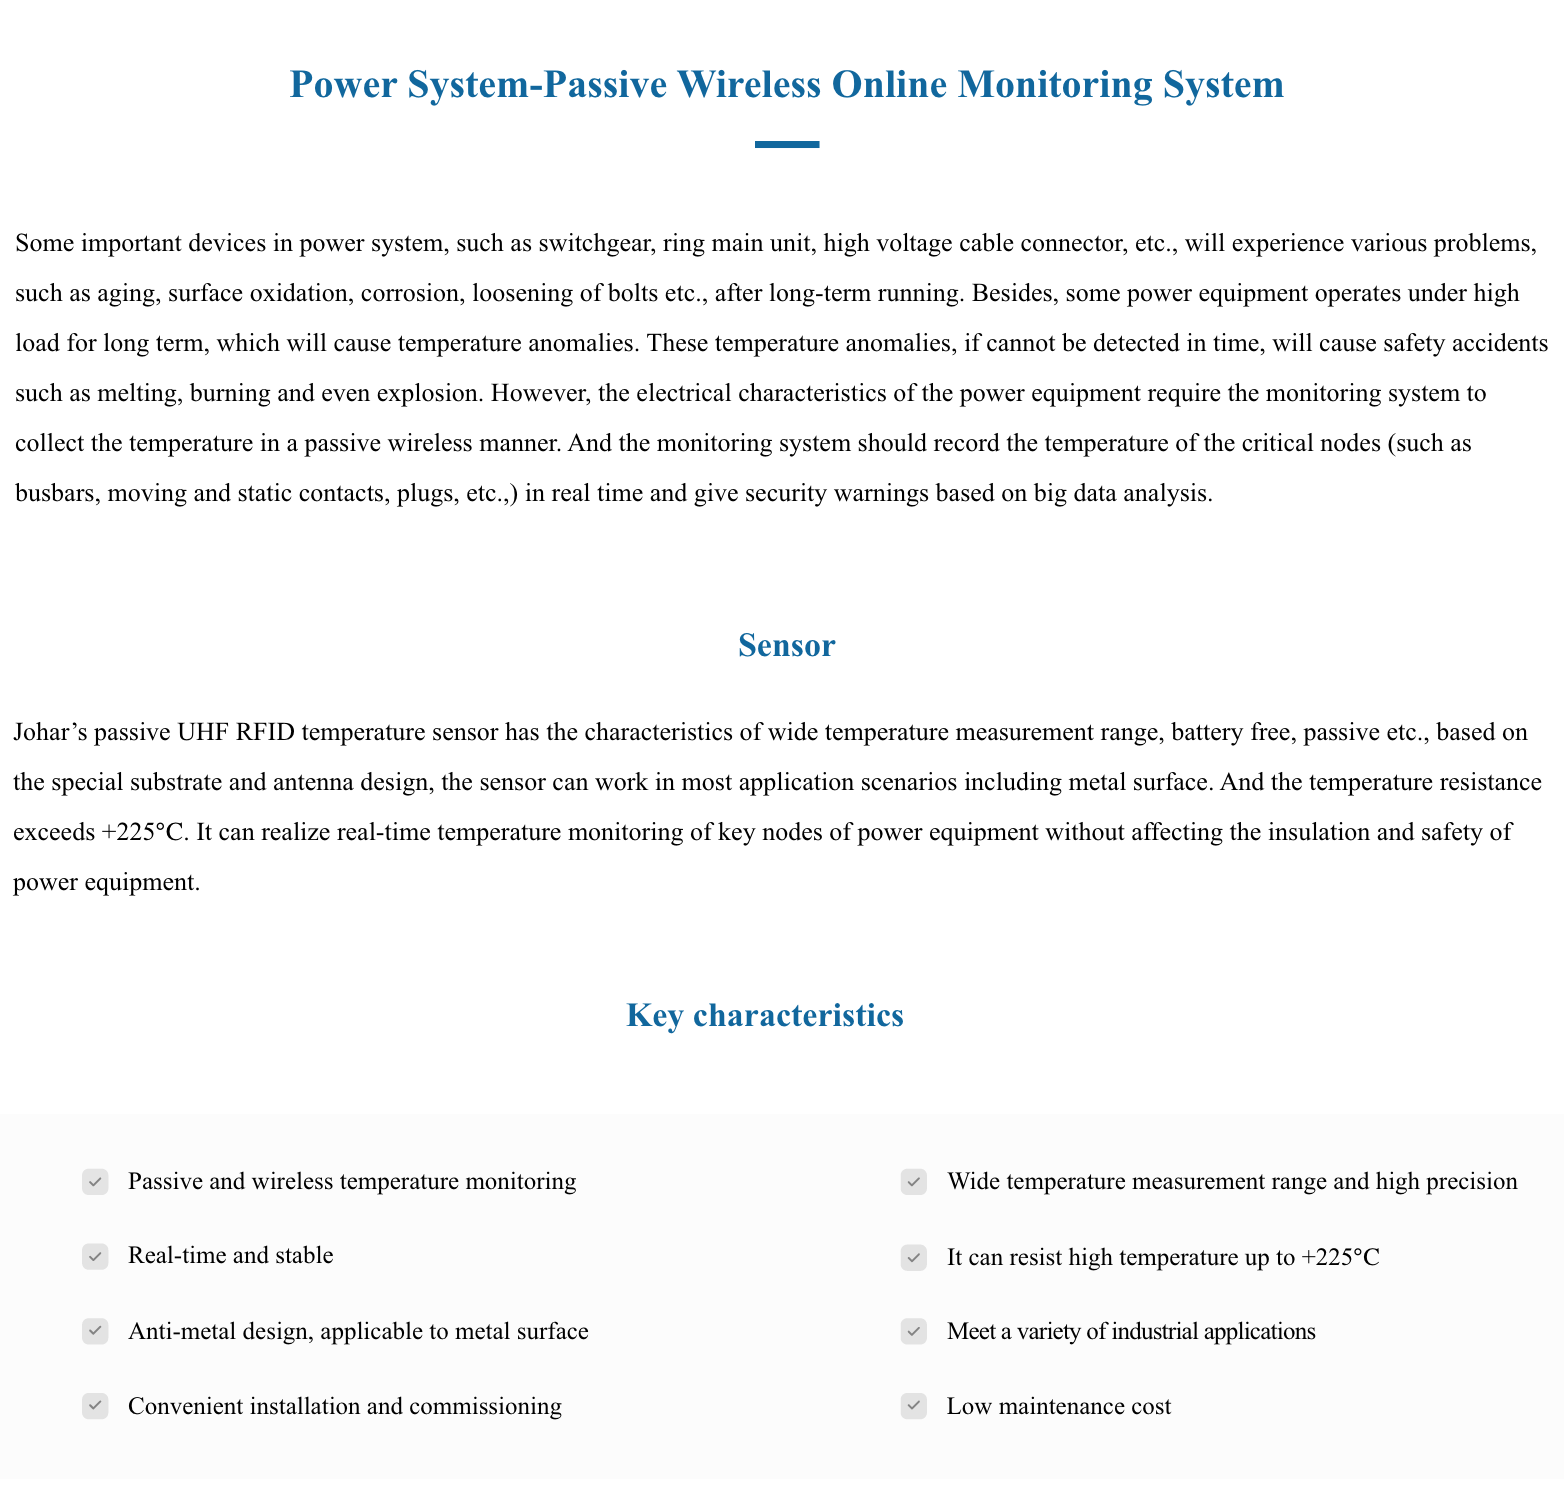 Power System-Passive Wireless Online Monitoring System(图1)